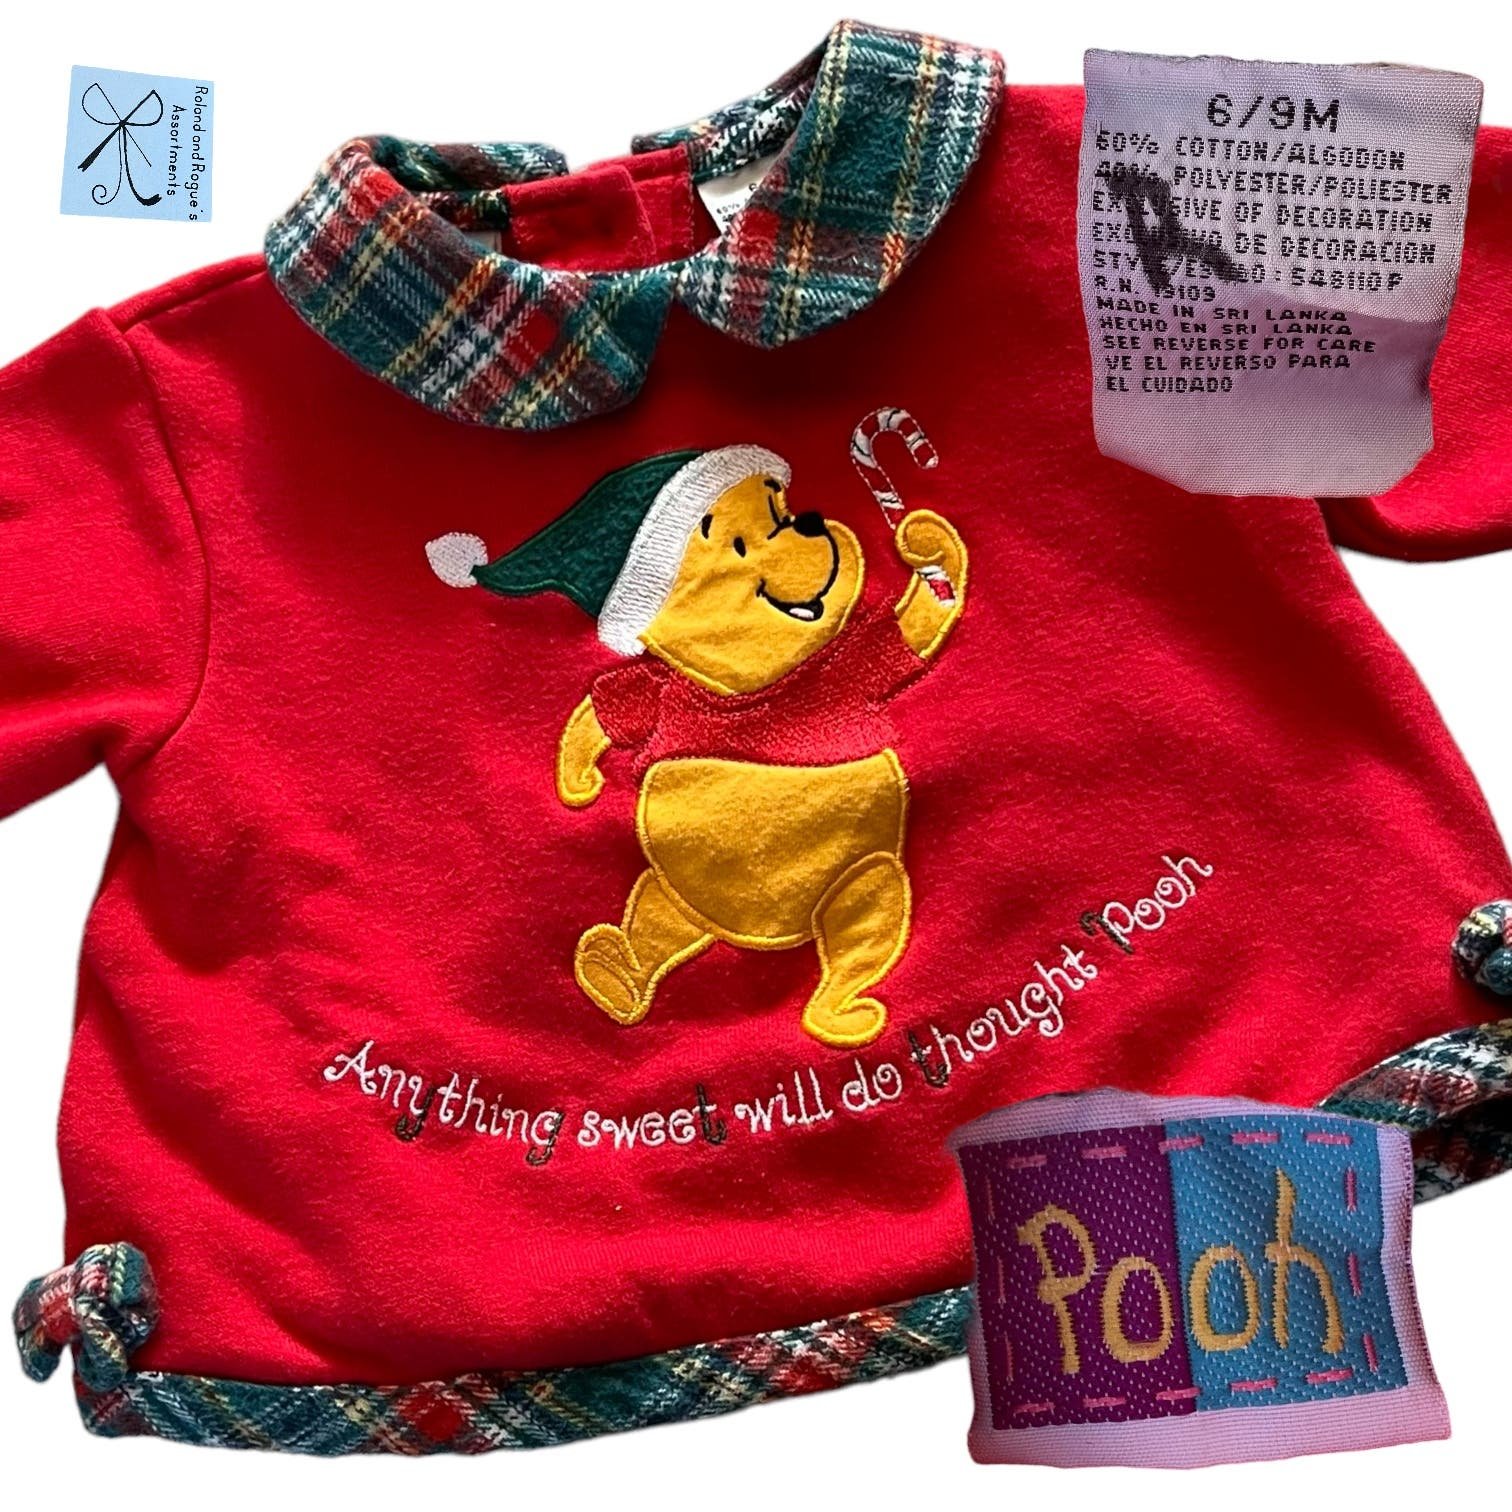 Pooh Disney Winnie the Pooh Anything Sweet will do Pooh